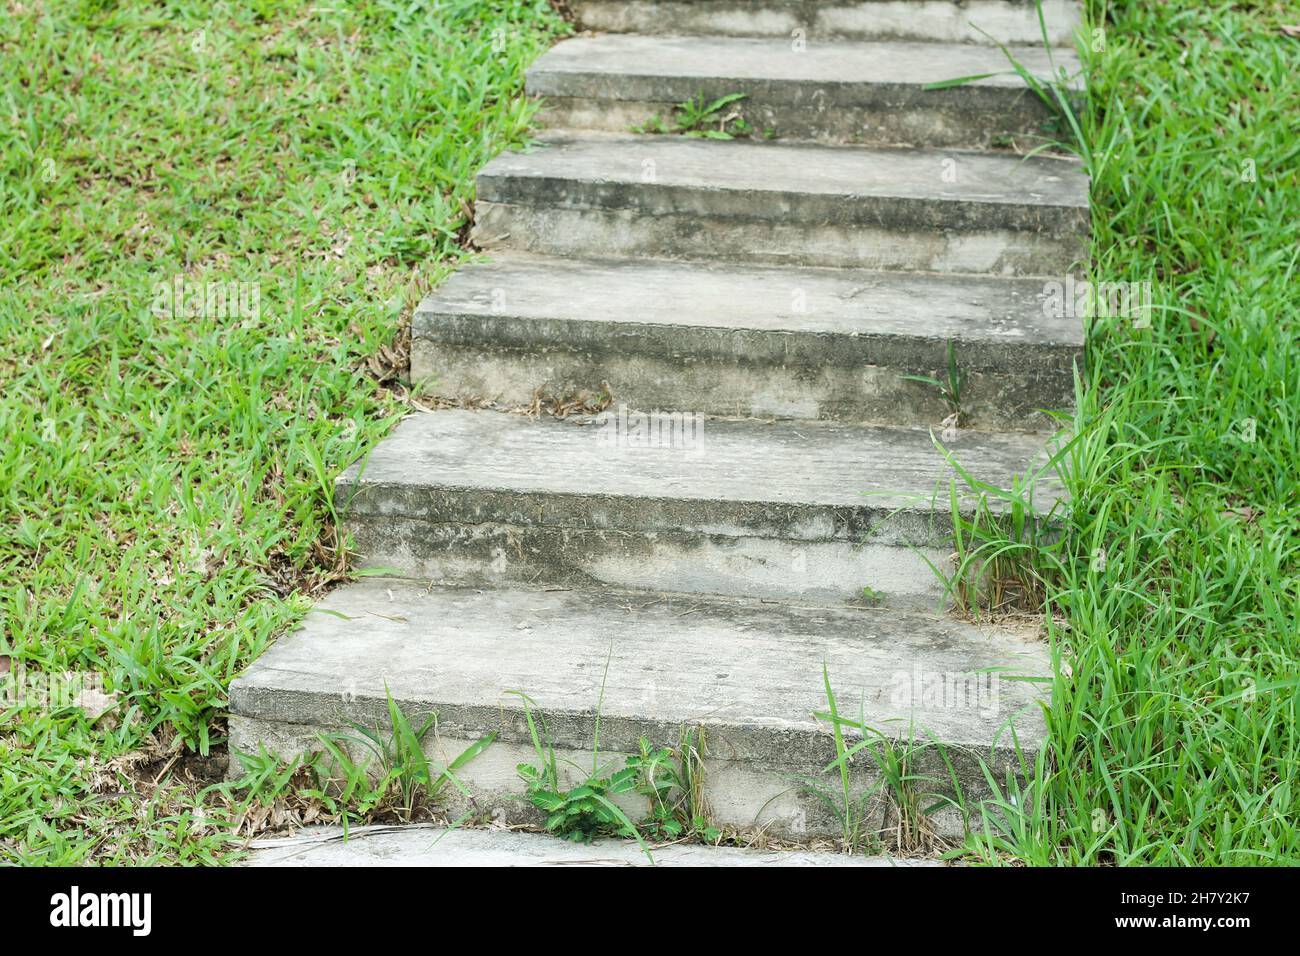 Stone steps in an area with abundant green grass during the rainy season. Stock Photo